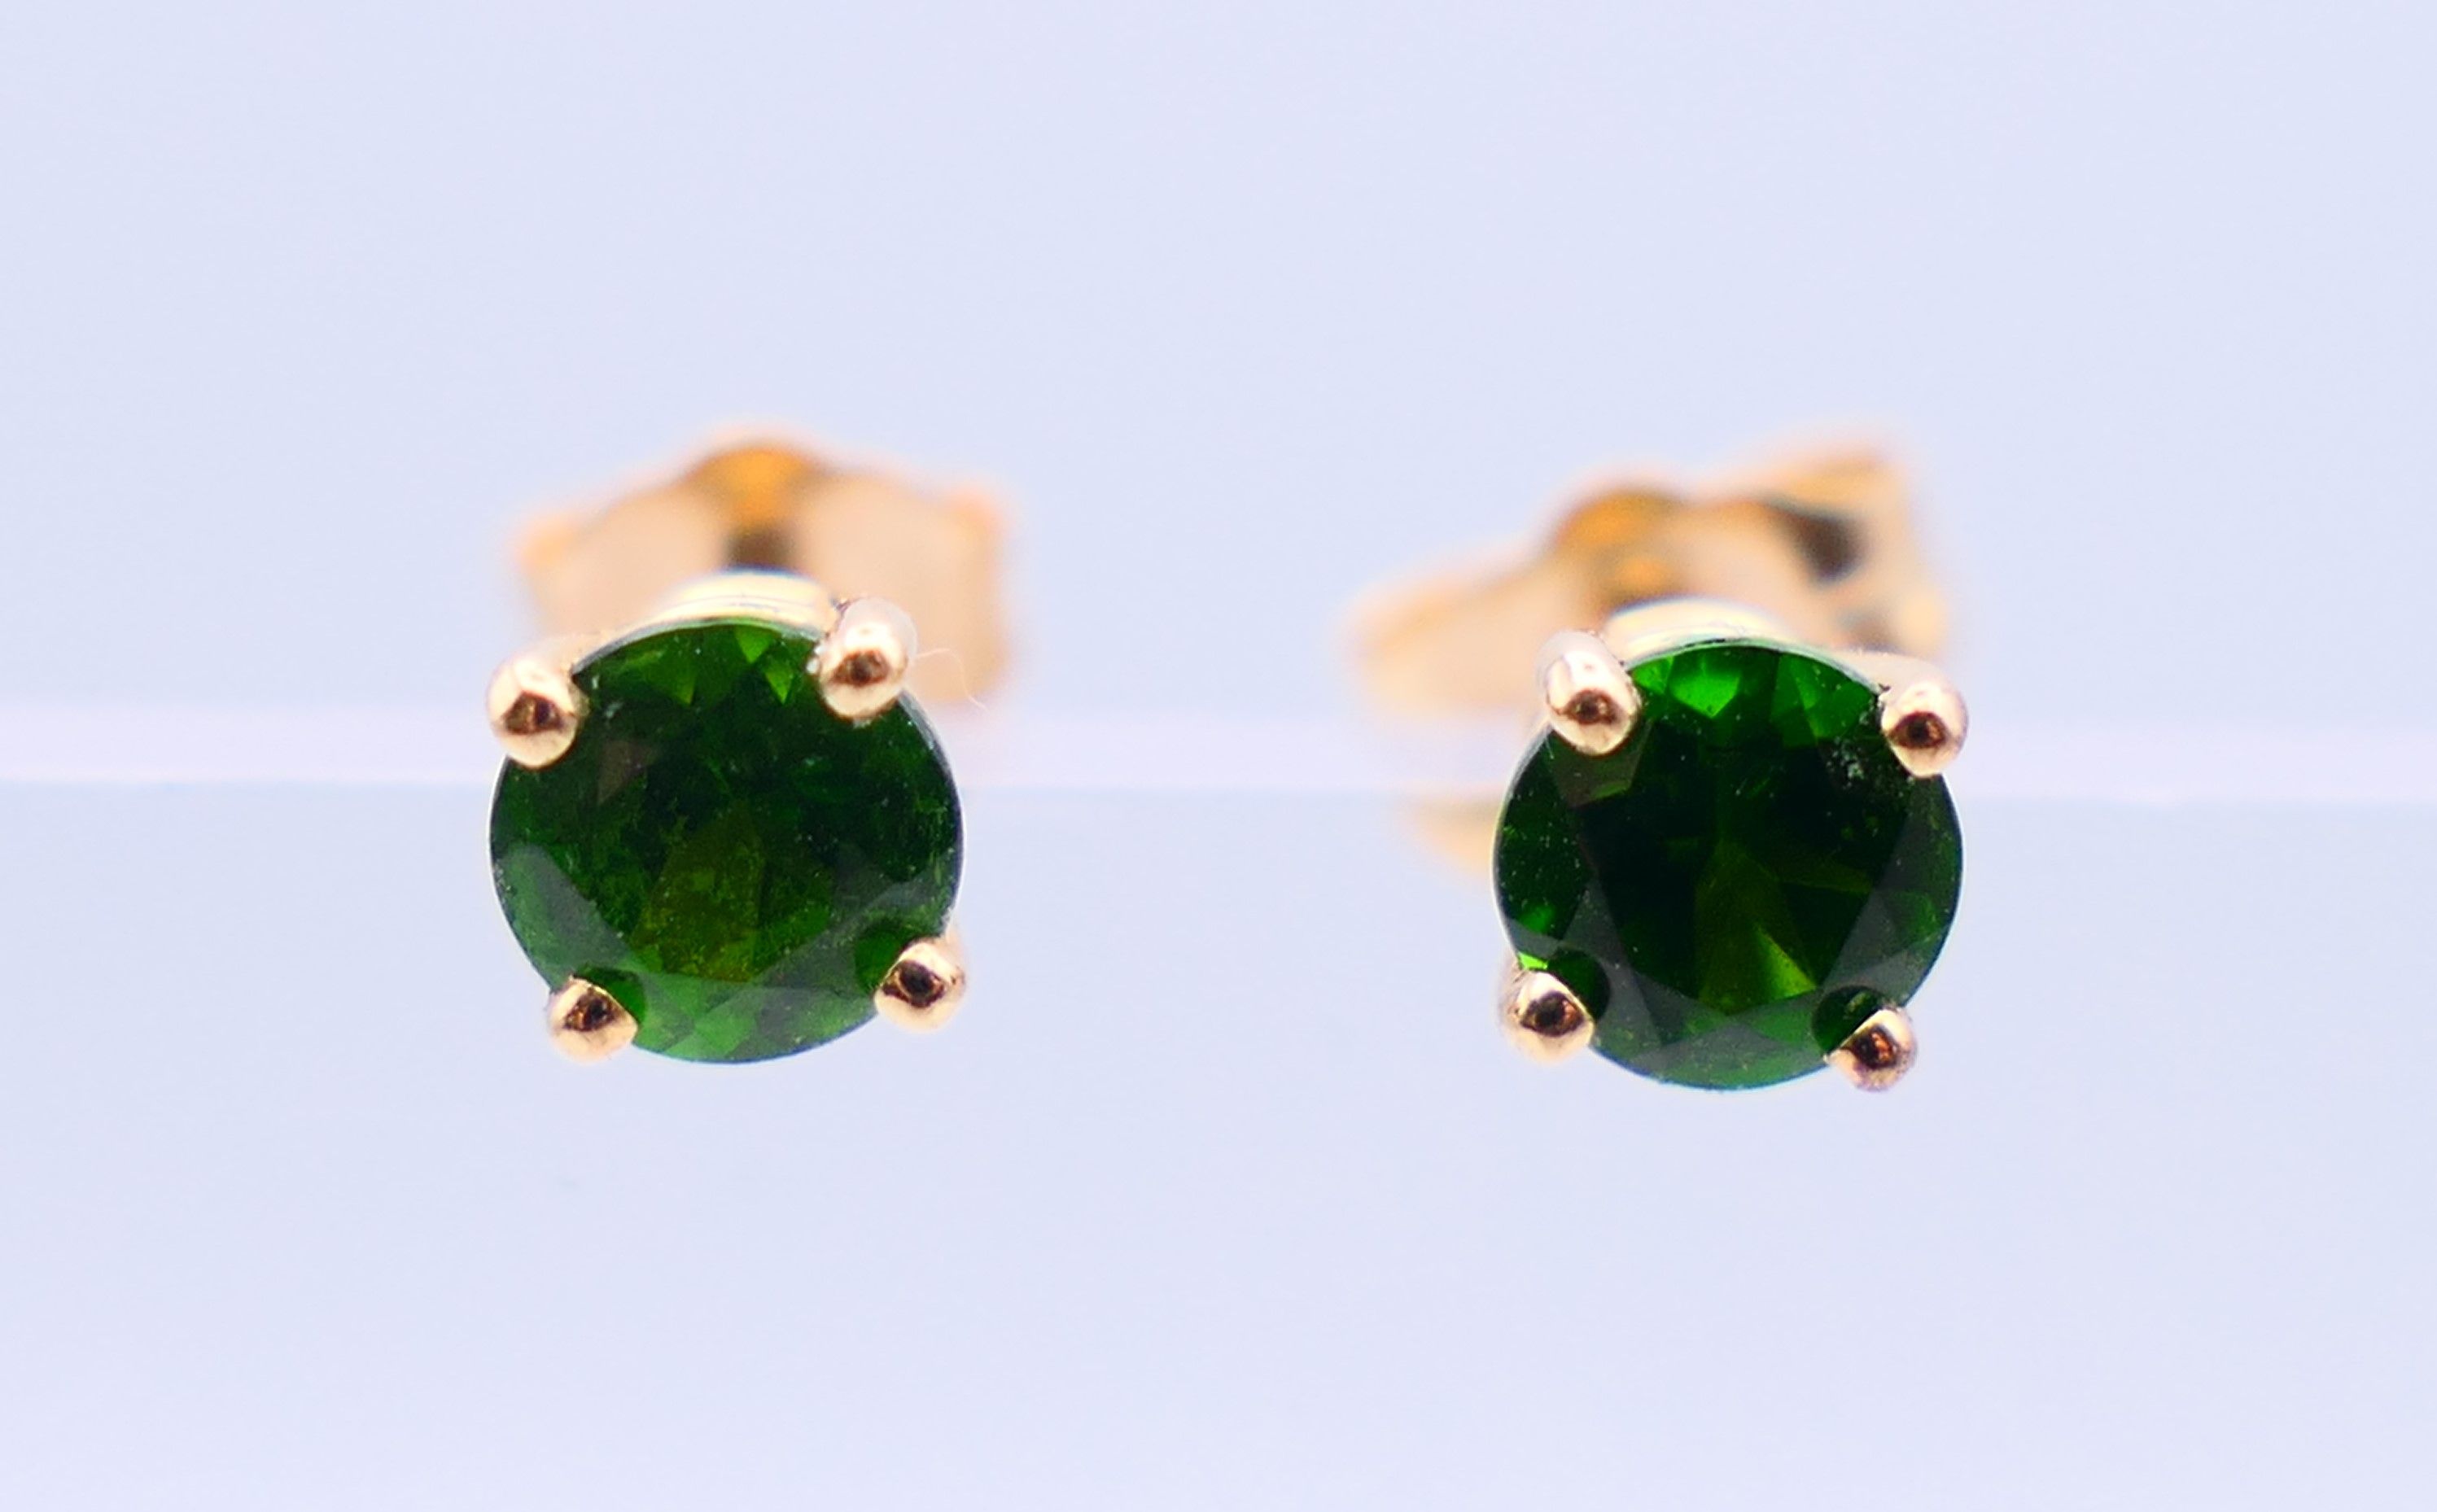 A pair of 14 k gold earrings set with green gemstones, possibly emeralds. 0.5 cm diameter.